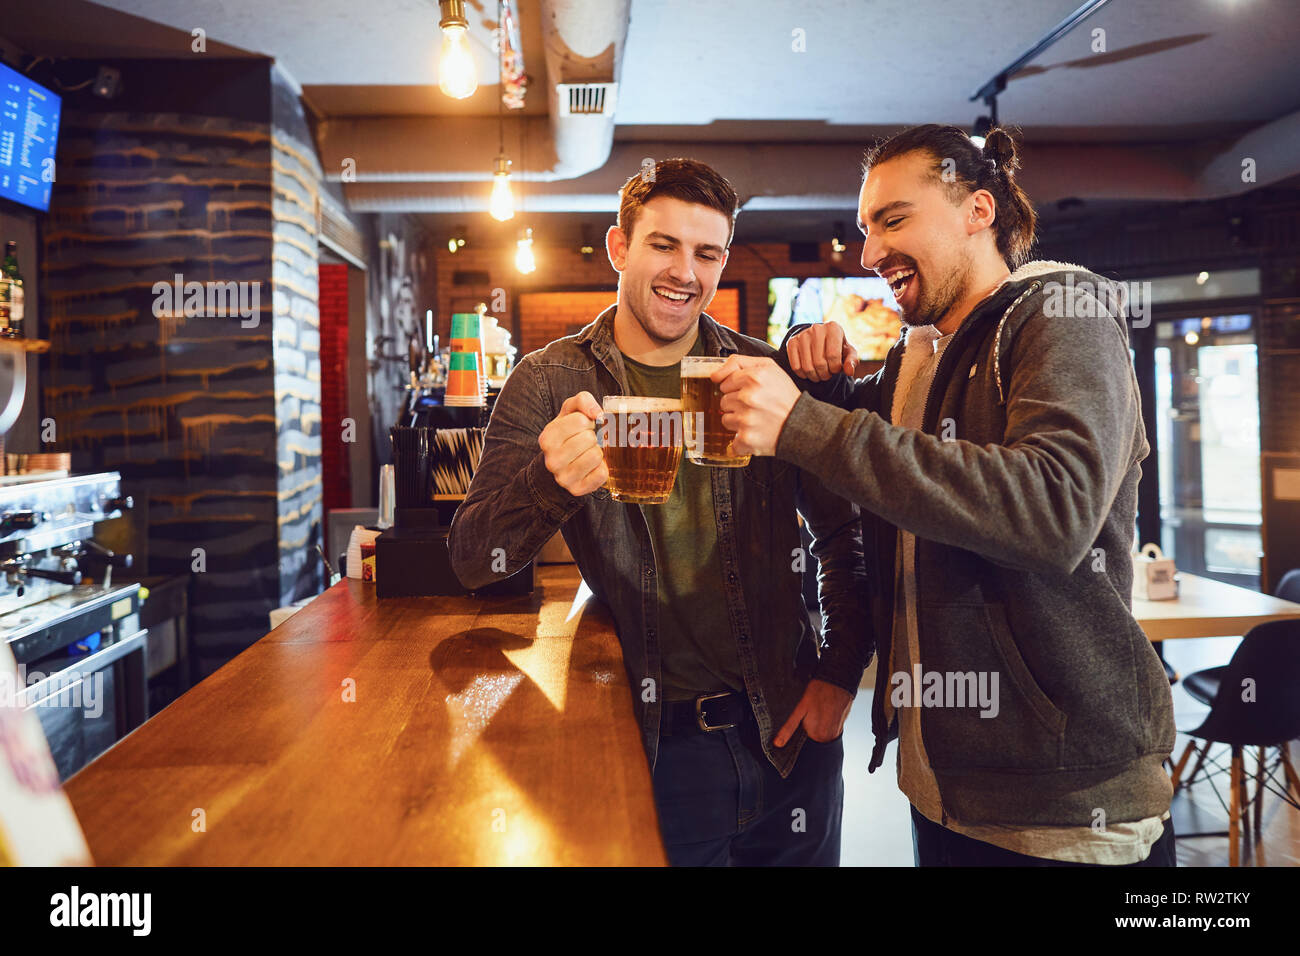 Friends talk, drink beer in a bar. Stock Photo